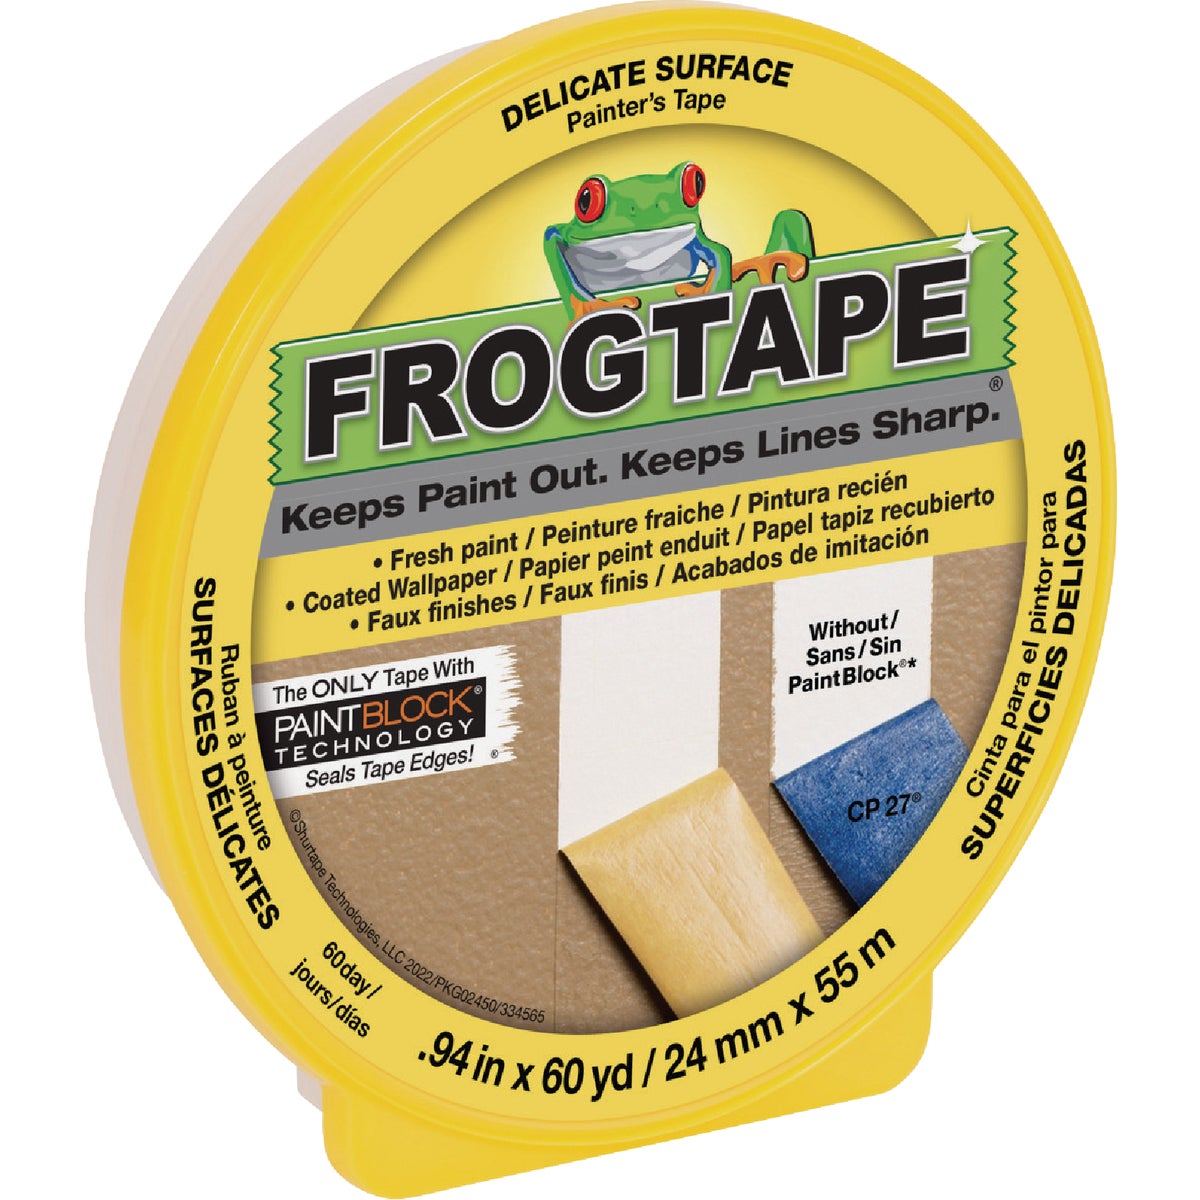 FrogTape 0.94 In. x 60 Yd, Delicate Surface Masking Tape